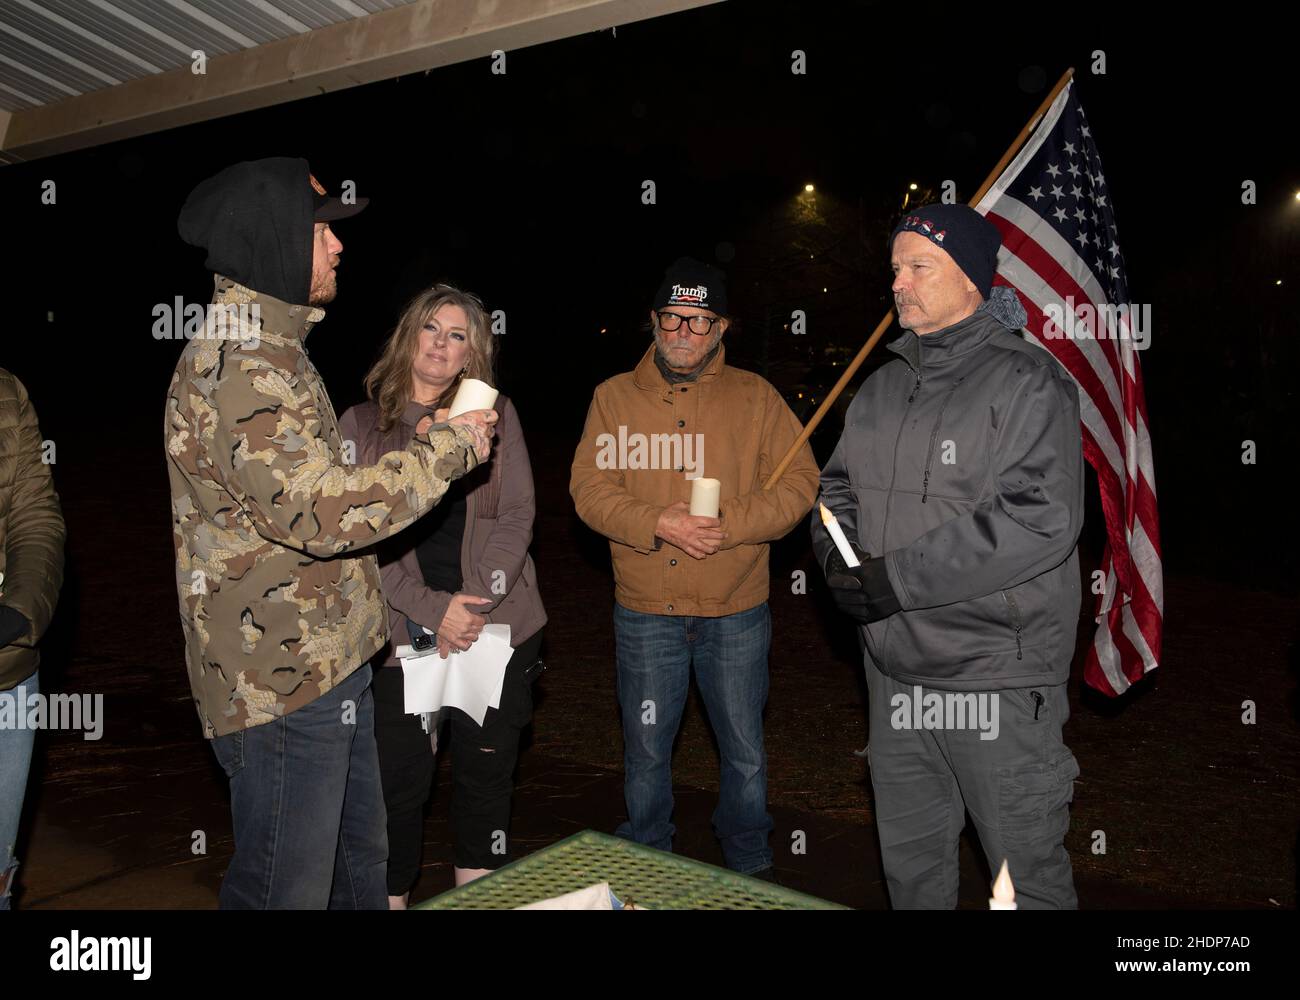 Woodstock, GA, USA. 6th Jan, 2022. Georgia Republican supporters of Former President Donald Trump gather at a Cherokee County park north of Atlanta for a prayer vigil to honor 'patriots' attending the January 6, 2021 protest at the U.S. Capitol. The vigil was organized by Look Ahead America group with candlelight vigils all across the country to honor the political prisoners and all those who've been politically persecuted in the aftermath of the January 6th protests, and to also commemorate the deaths of Ashli Babbitt and Rosanne Boyland.Pictured: RON LOEHRKE, 30. from Gainesville, Geo Credit Stock Photo